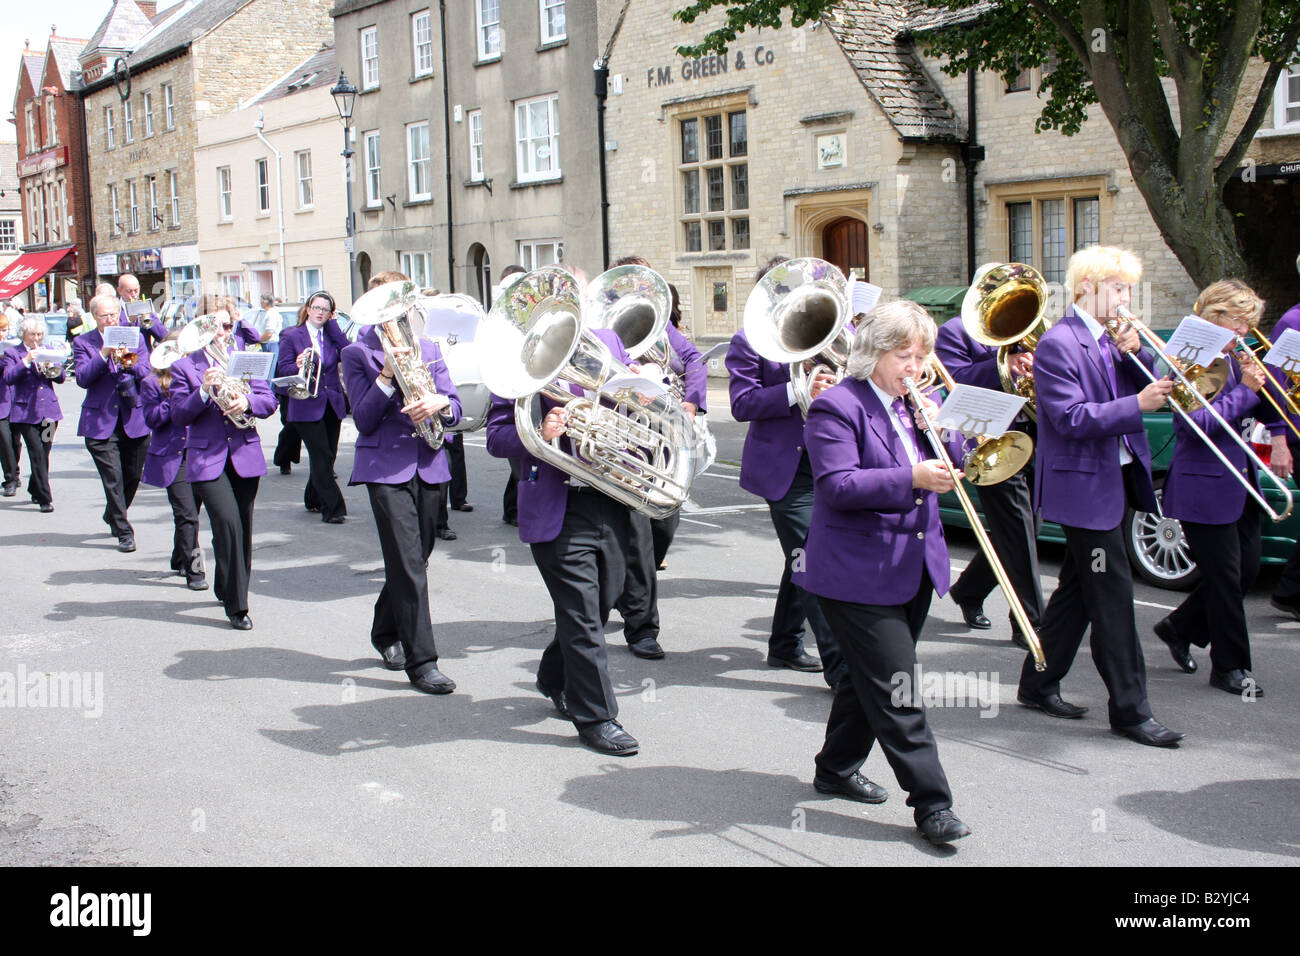 A brass band plays at Witney carnival Oxfordshire UK. Stock Photo